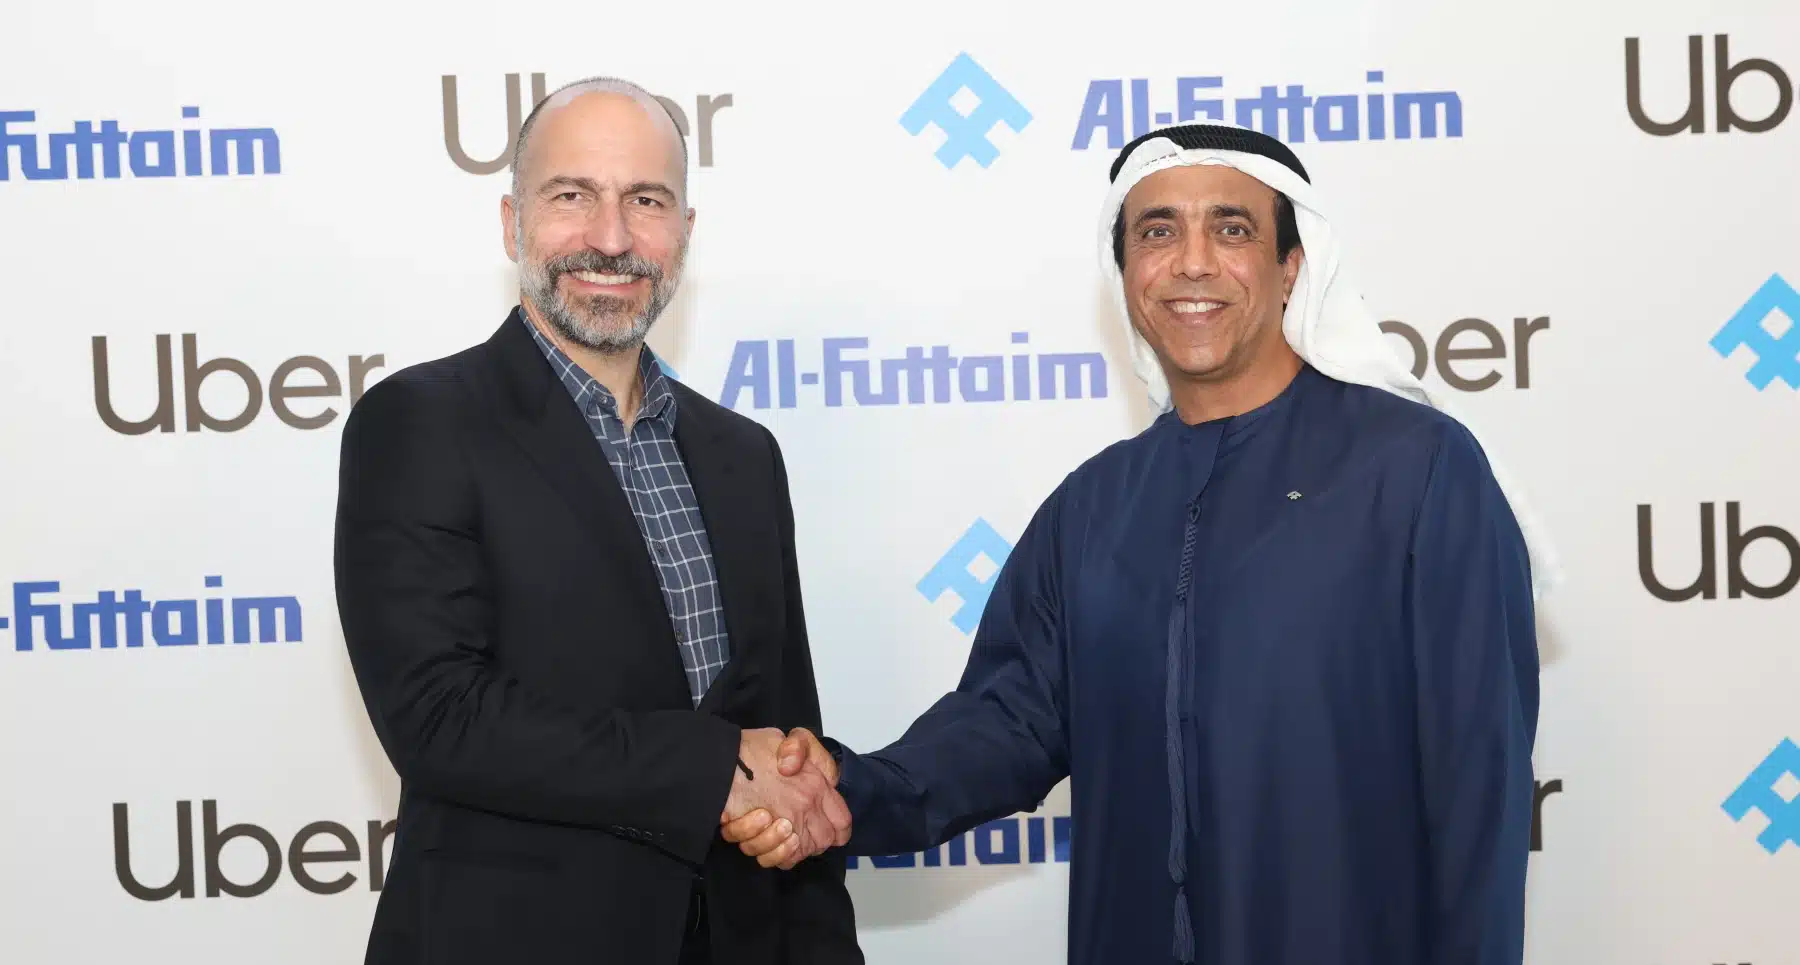 Al-Futtaim Electric Mobility Company and Uber sign regional agreement